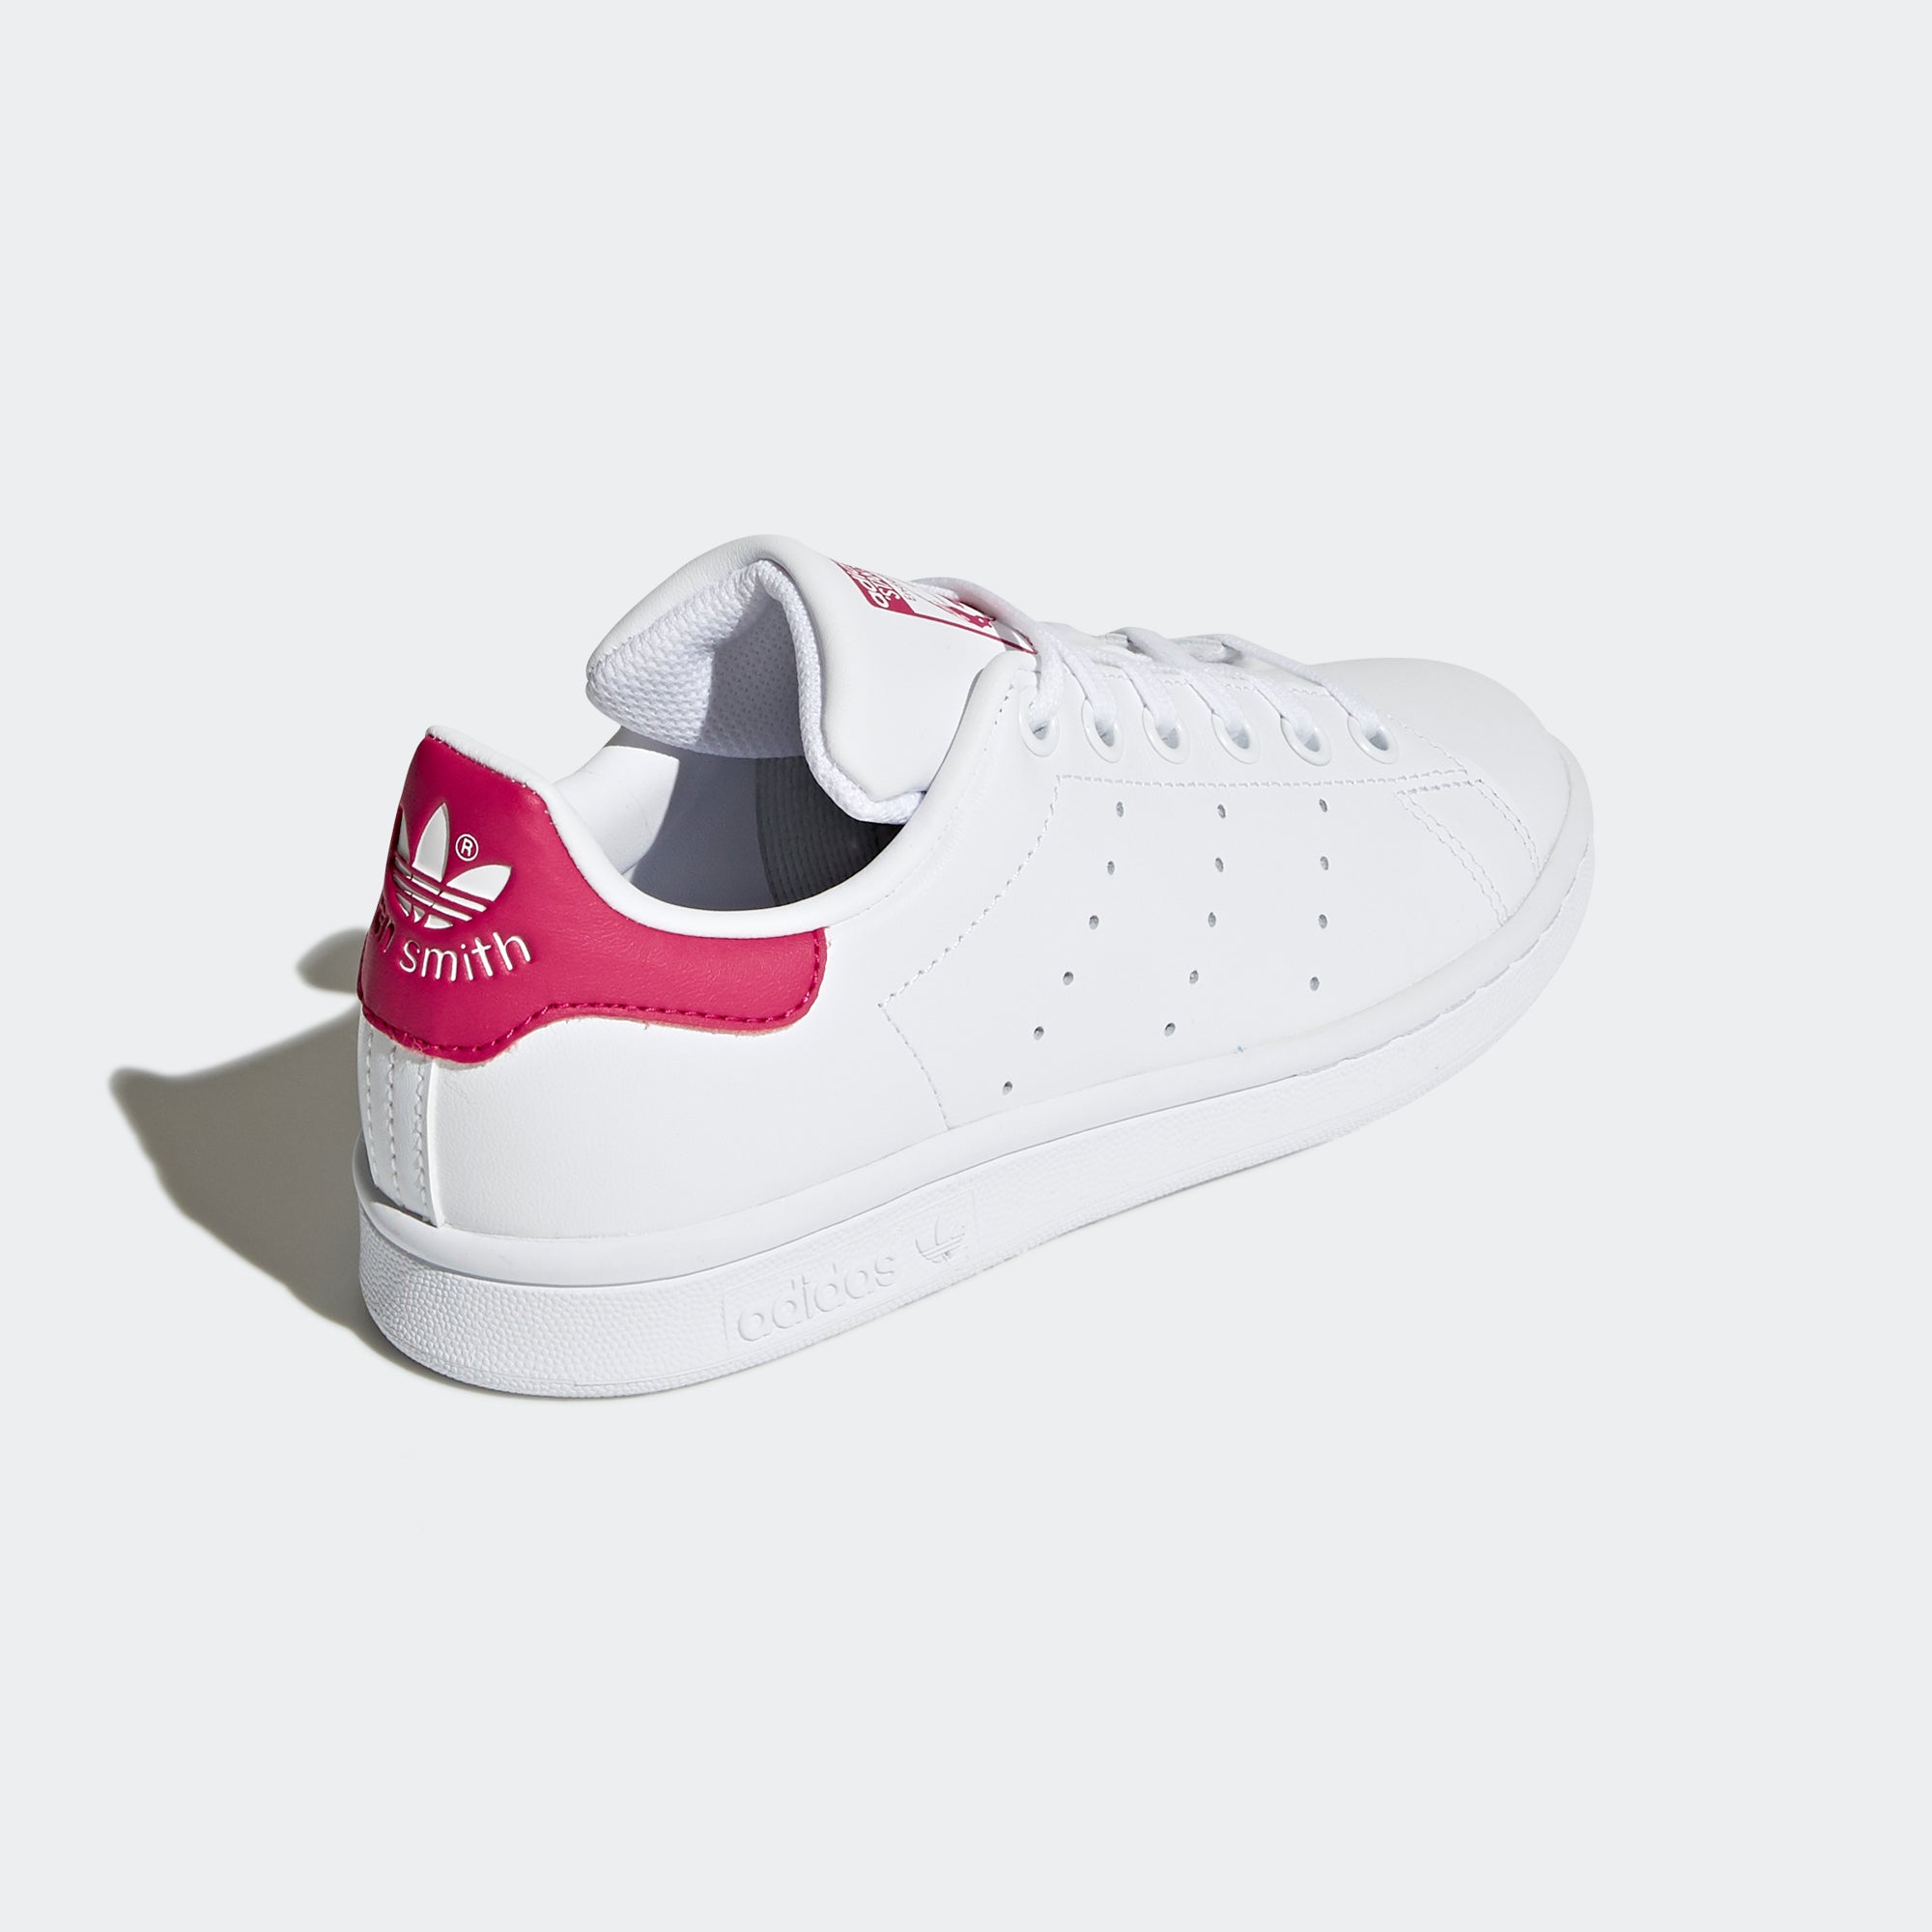 City Bold Pink B32703 adidas Sports Smith | White Shoes Chicago Stan